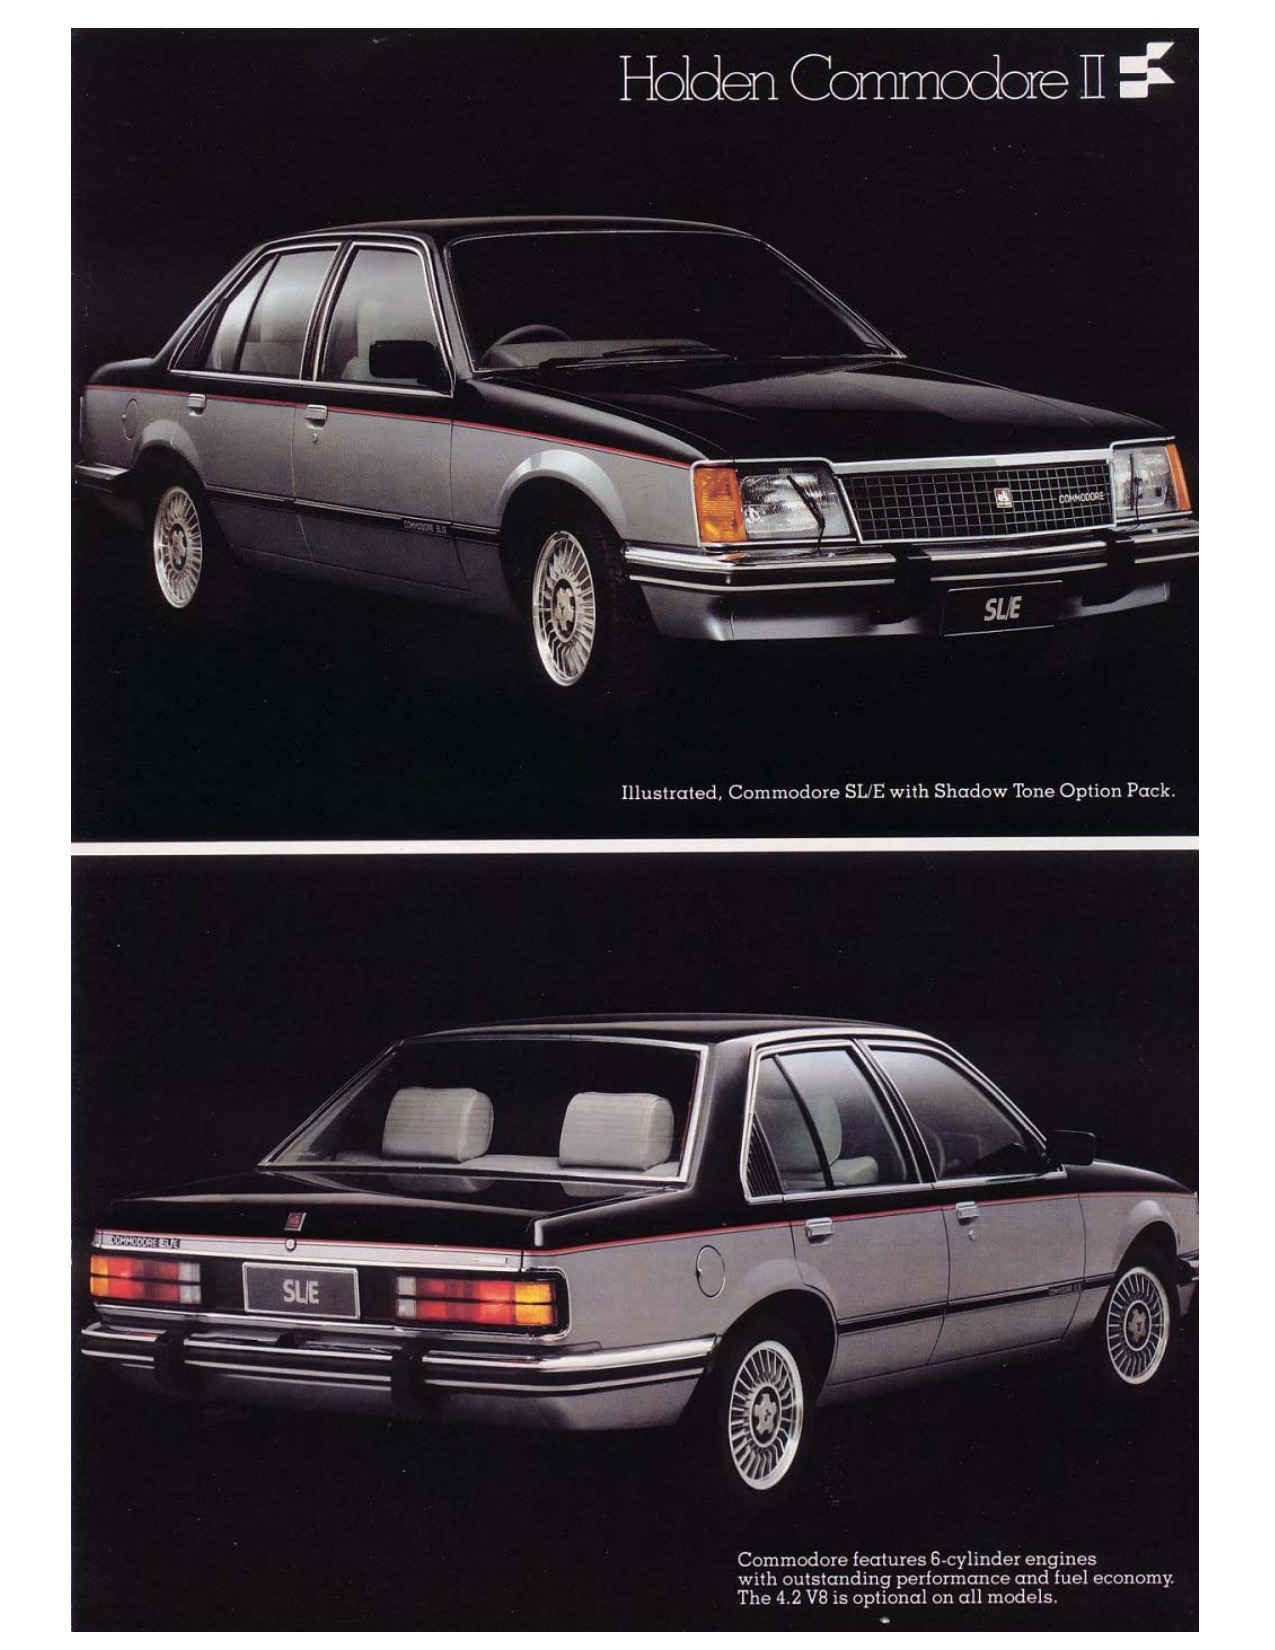 1980 Holden VC Commodore Brochure Page 2